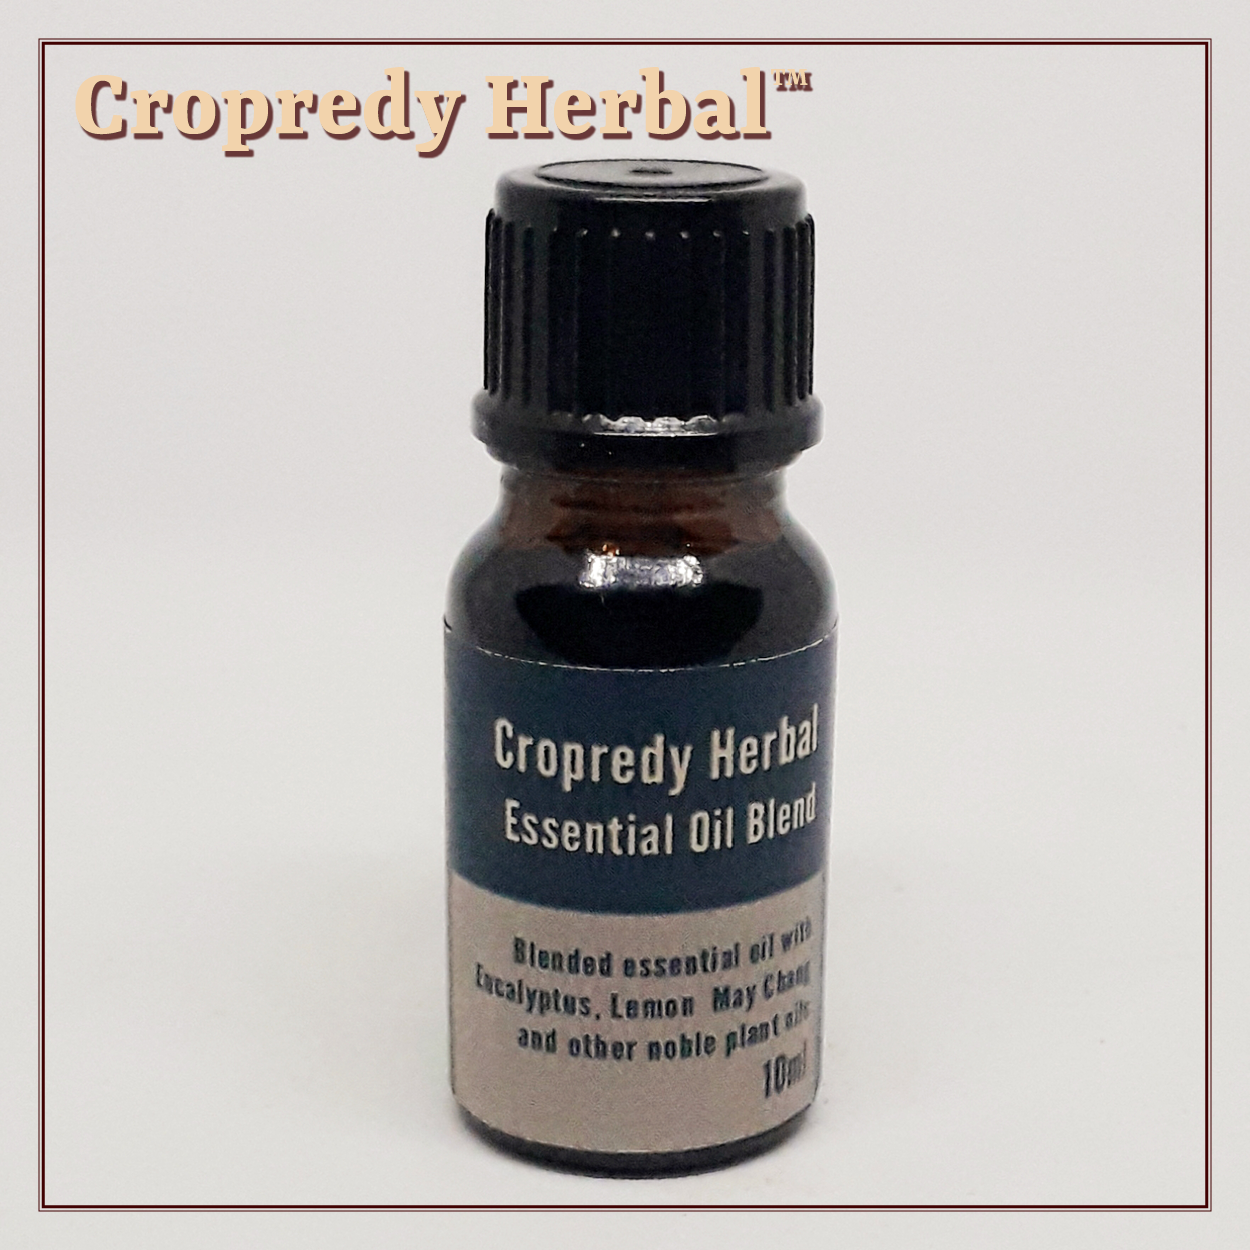 Cropredy Herbal Oil, Fiddler's Elbow Grease, Replenishing Oil, Herbal, Antimicrobial. skin nourishing, conditioning, soothing